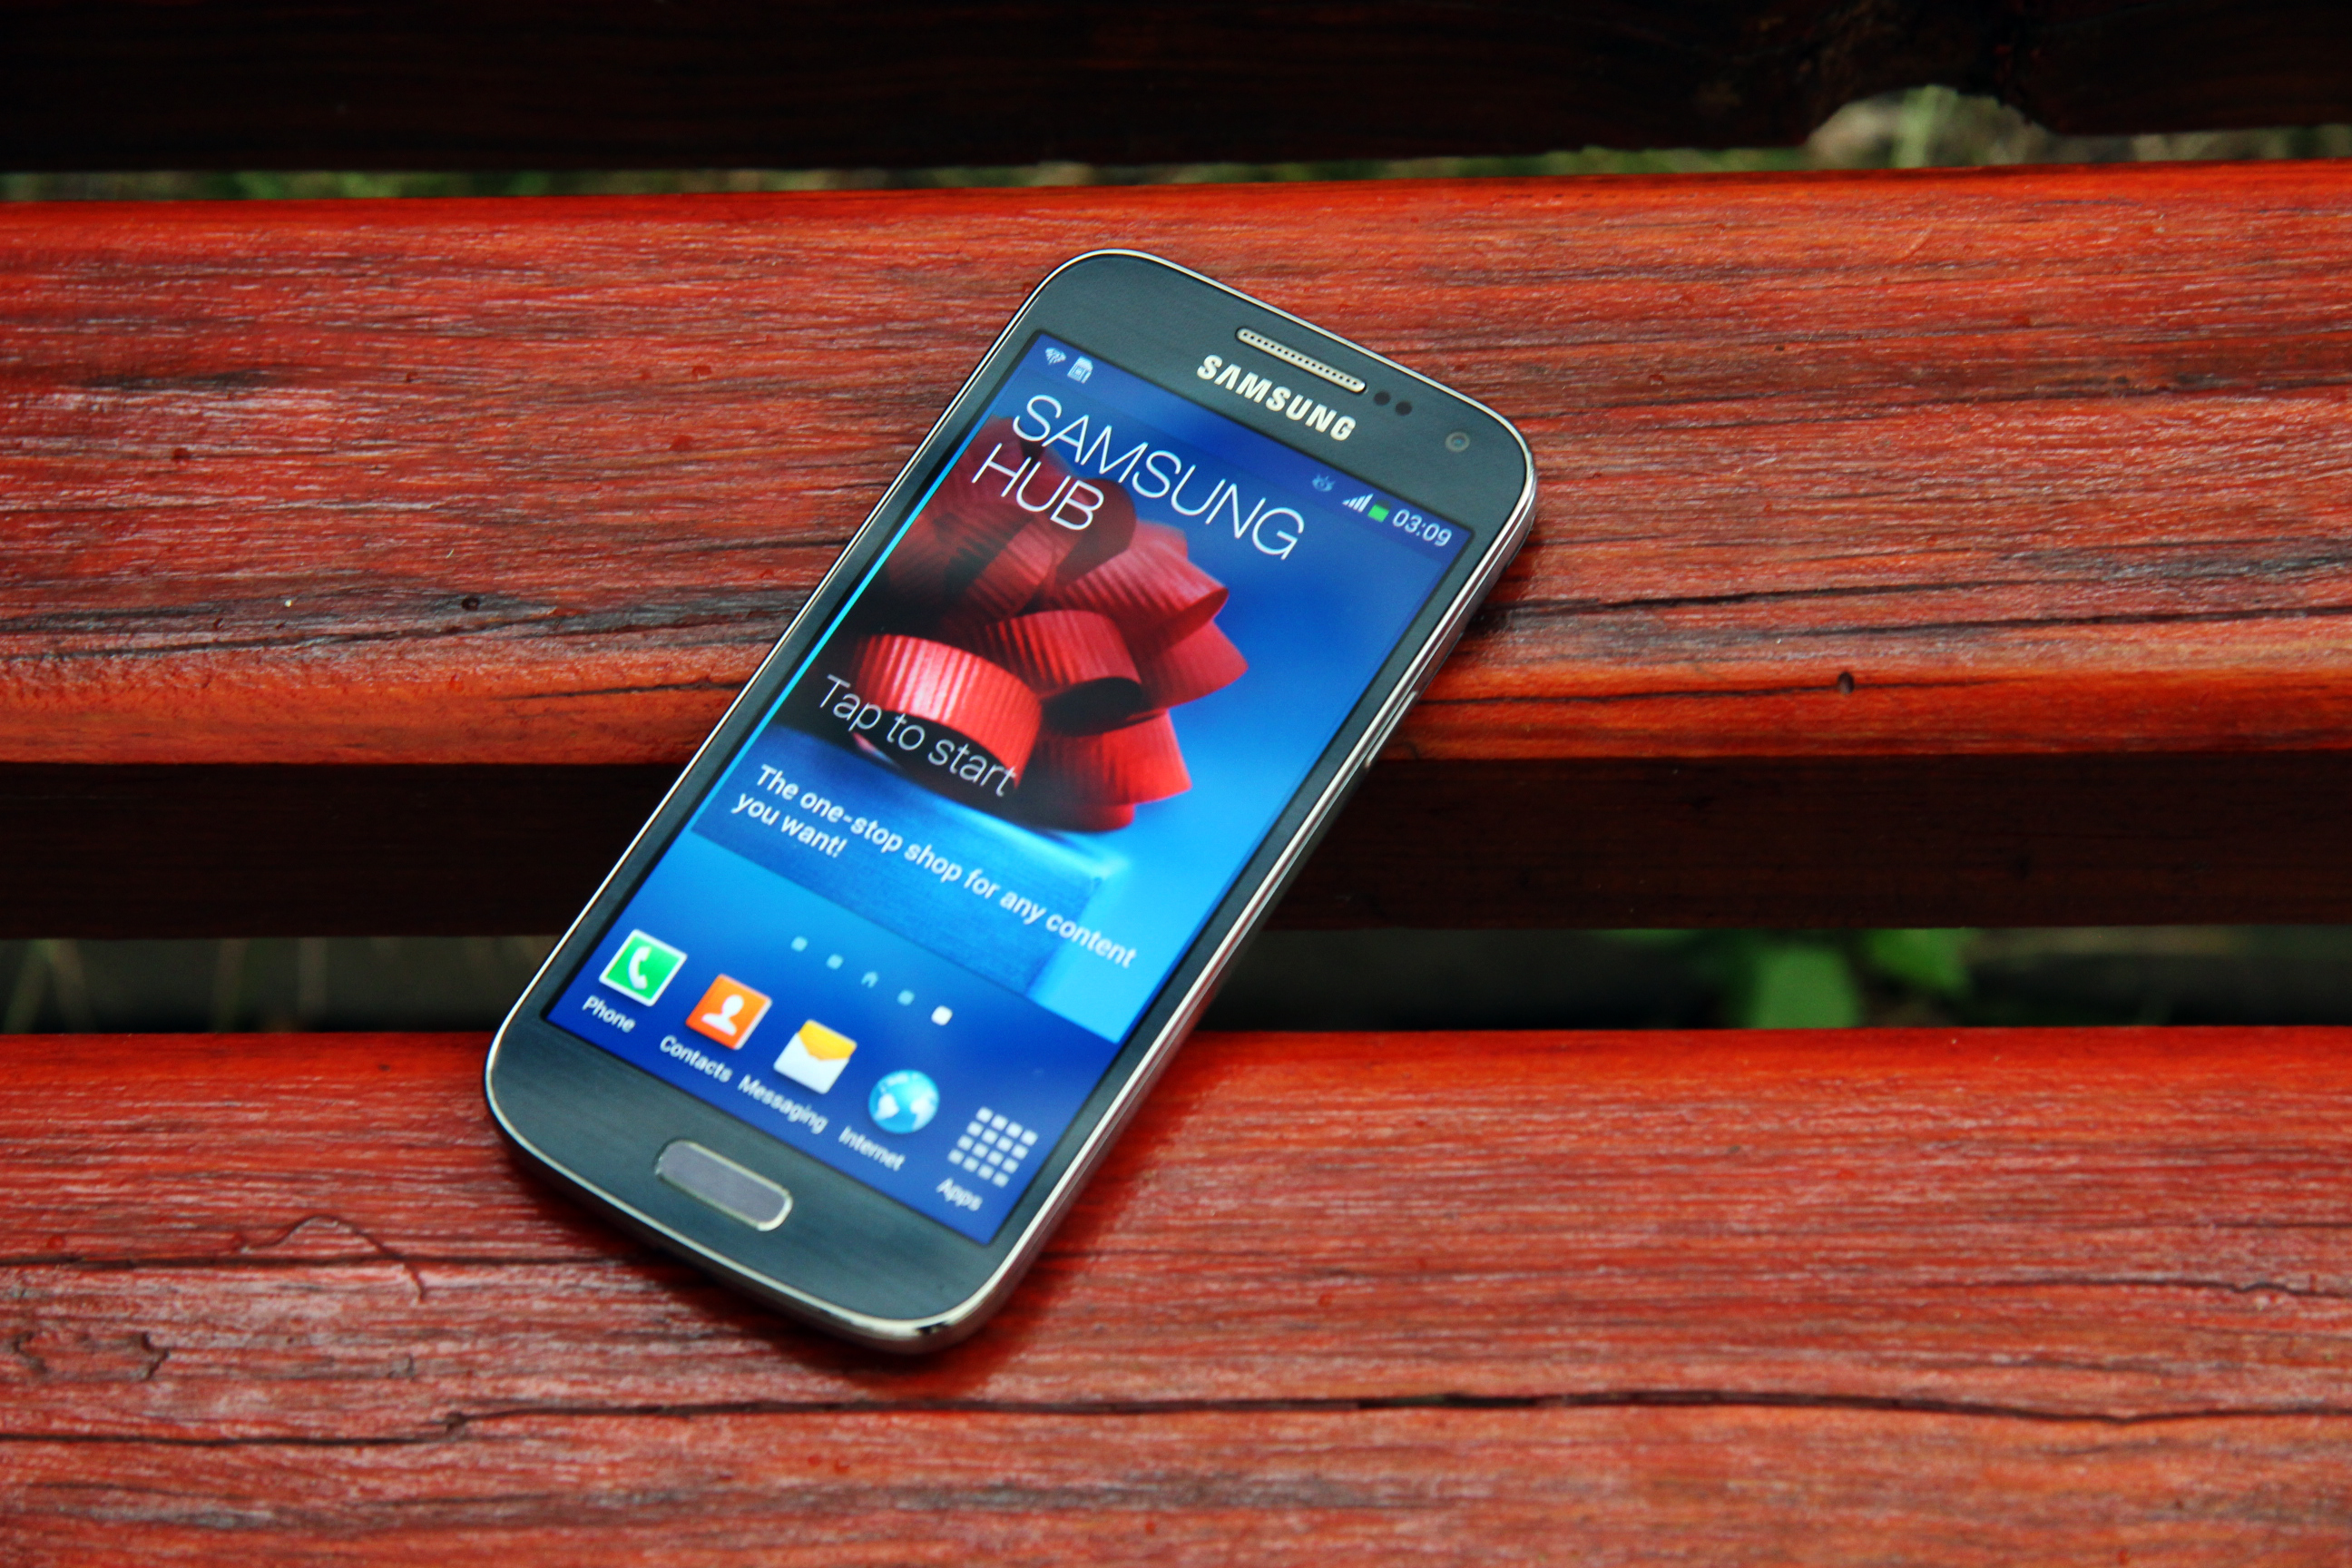 Samsung Galaxy S4 on the bench.